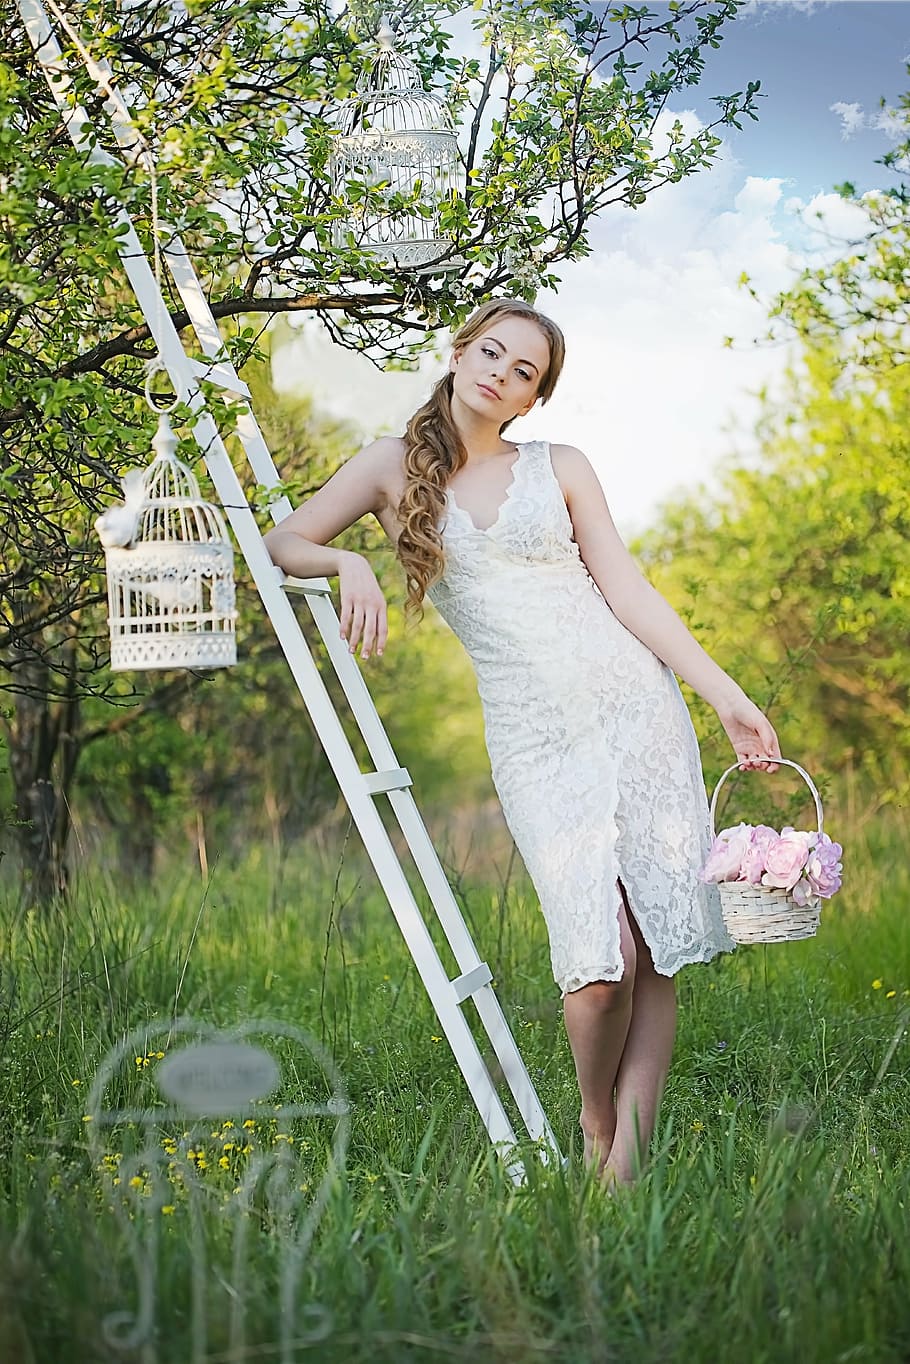 woman wearing white lace dress holding basket leaning on white wooden ladder with birdcage, HD wallpaper